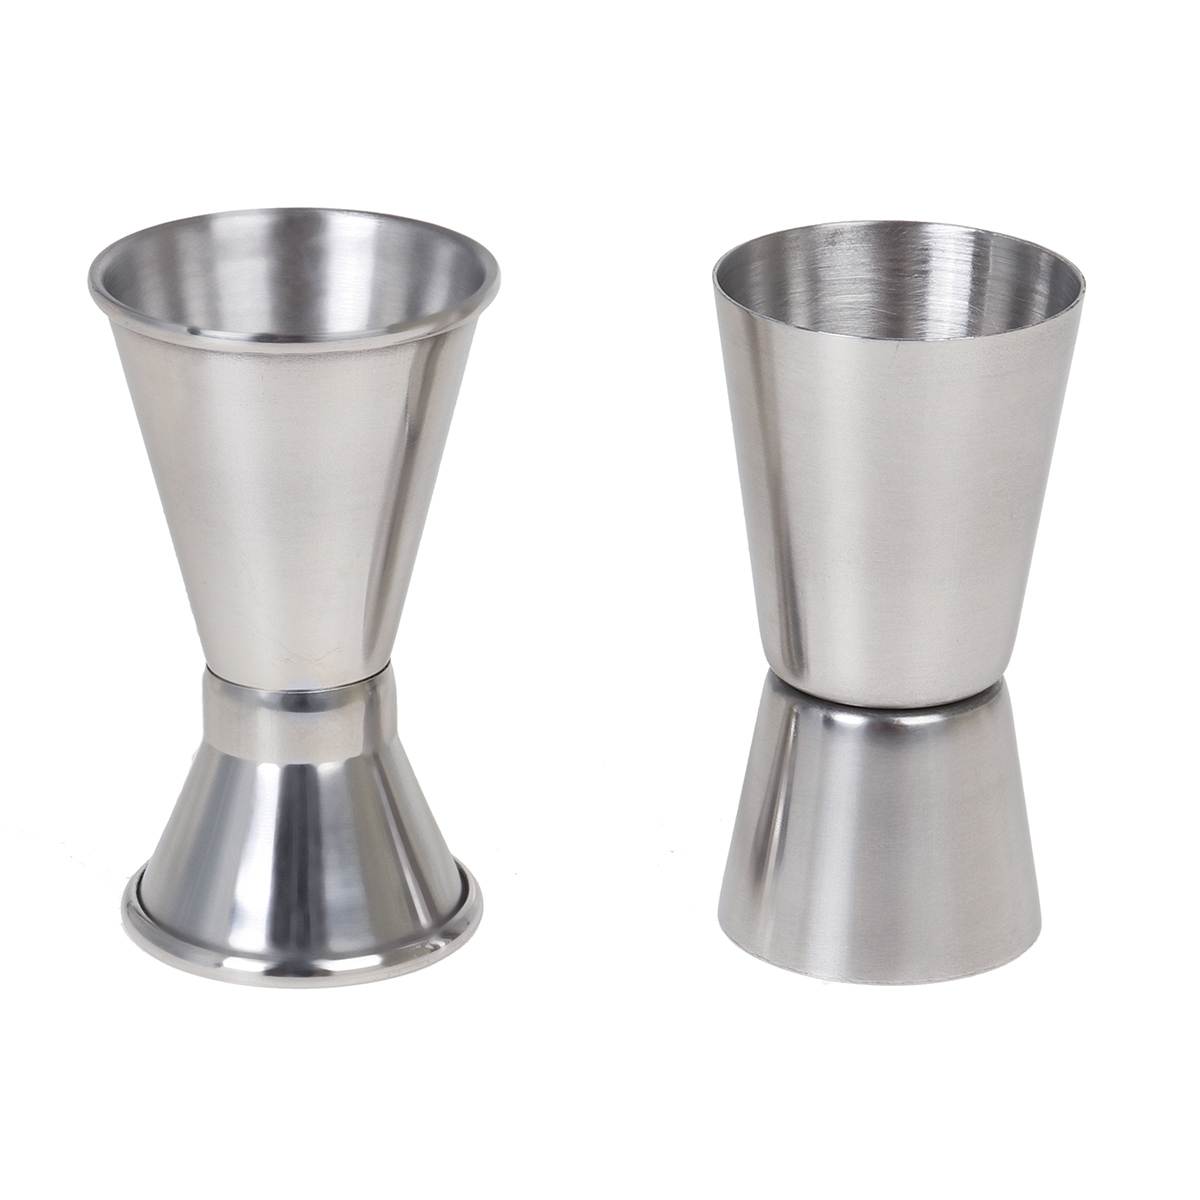 20PCS-750ml-Stainless-Steel-Cocktail-Shaker-Cocktail-Shaker-Drink-Set-Cocktail-Shaker-1719706-8